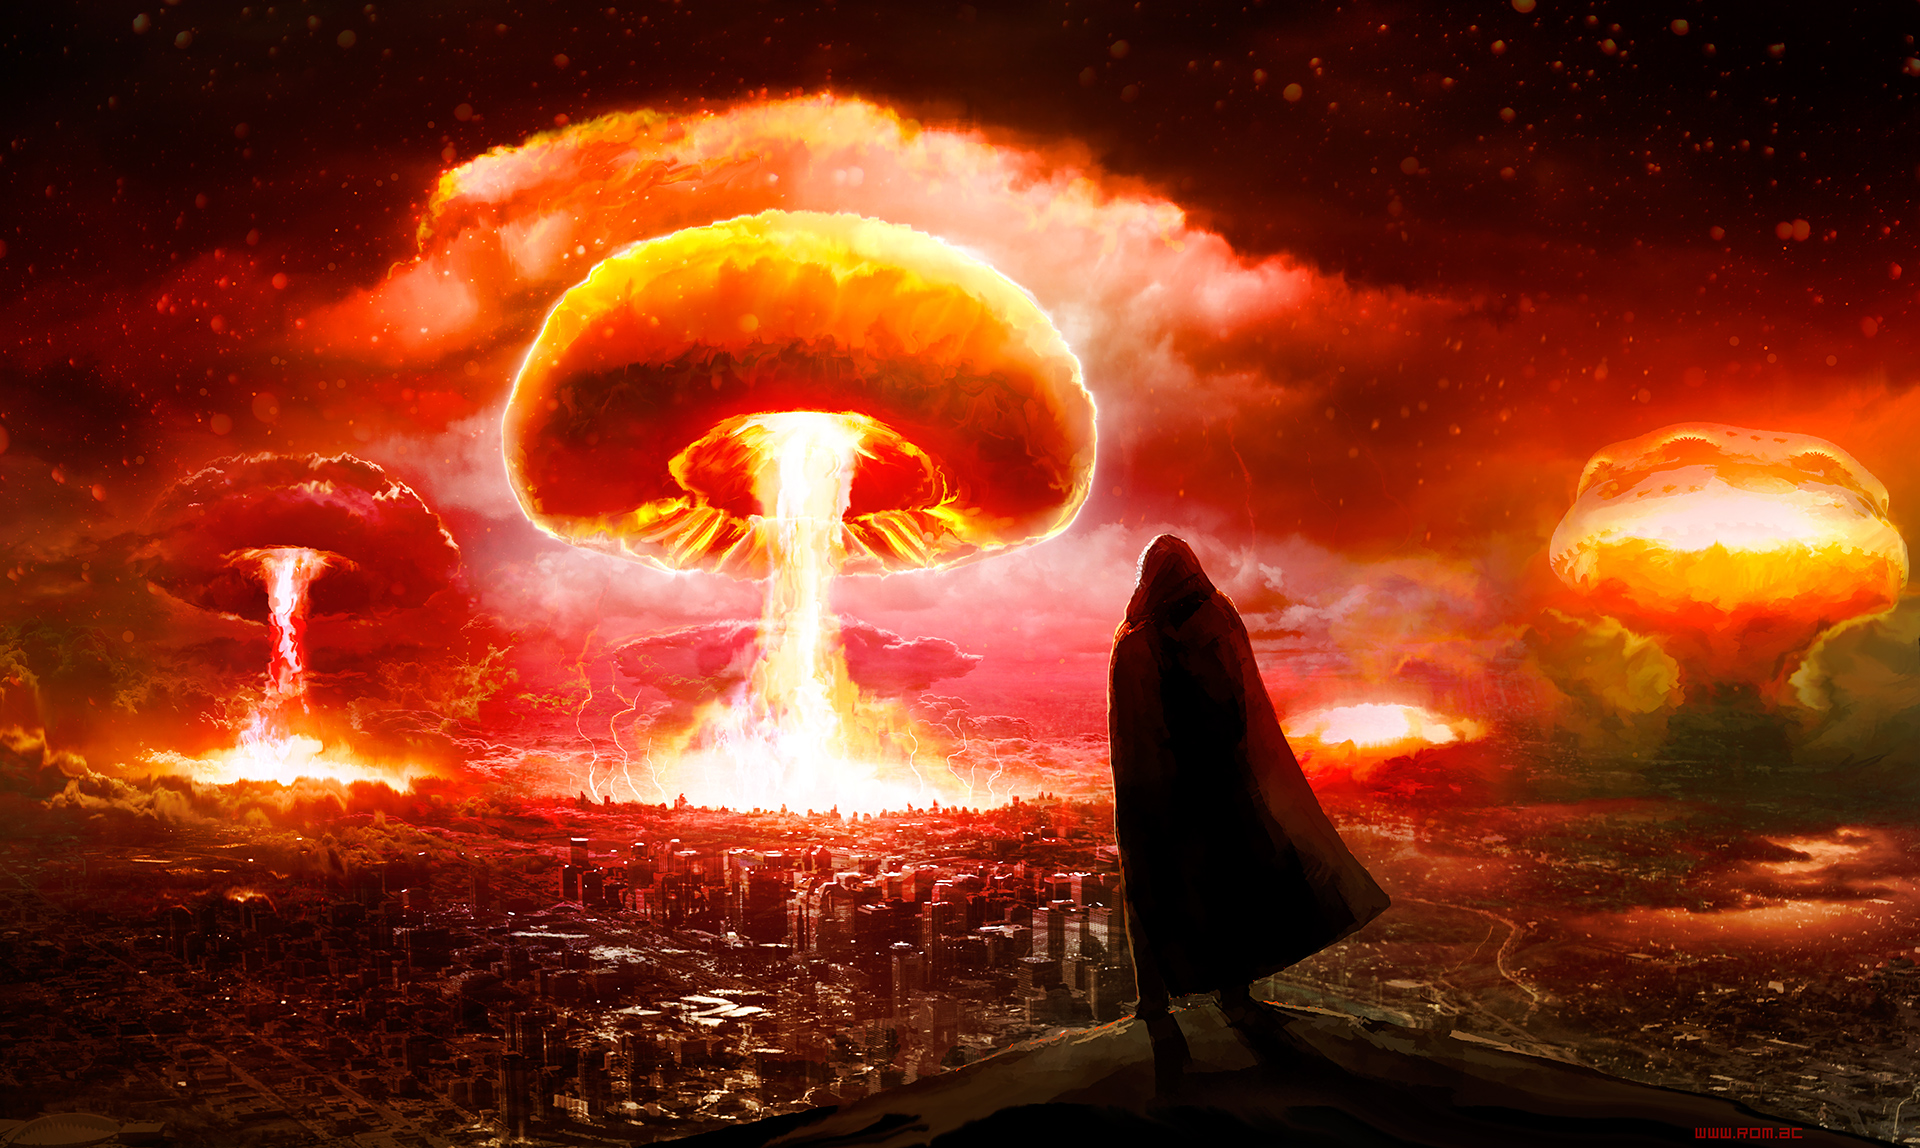 Romantically Apocalyptic Drawing Nuclear Nuclear Cloud Apocalyptic Fire City Hoods Cape Explosion Ni 1920x1148